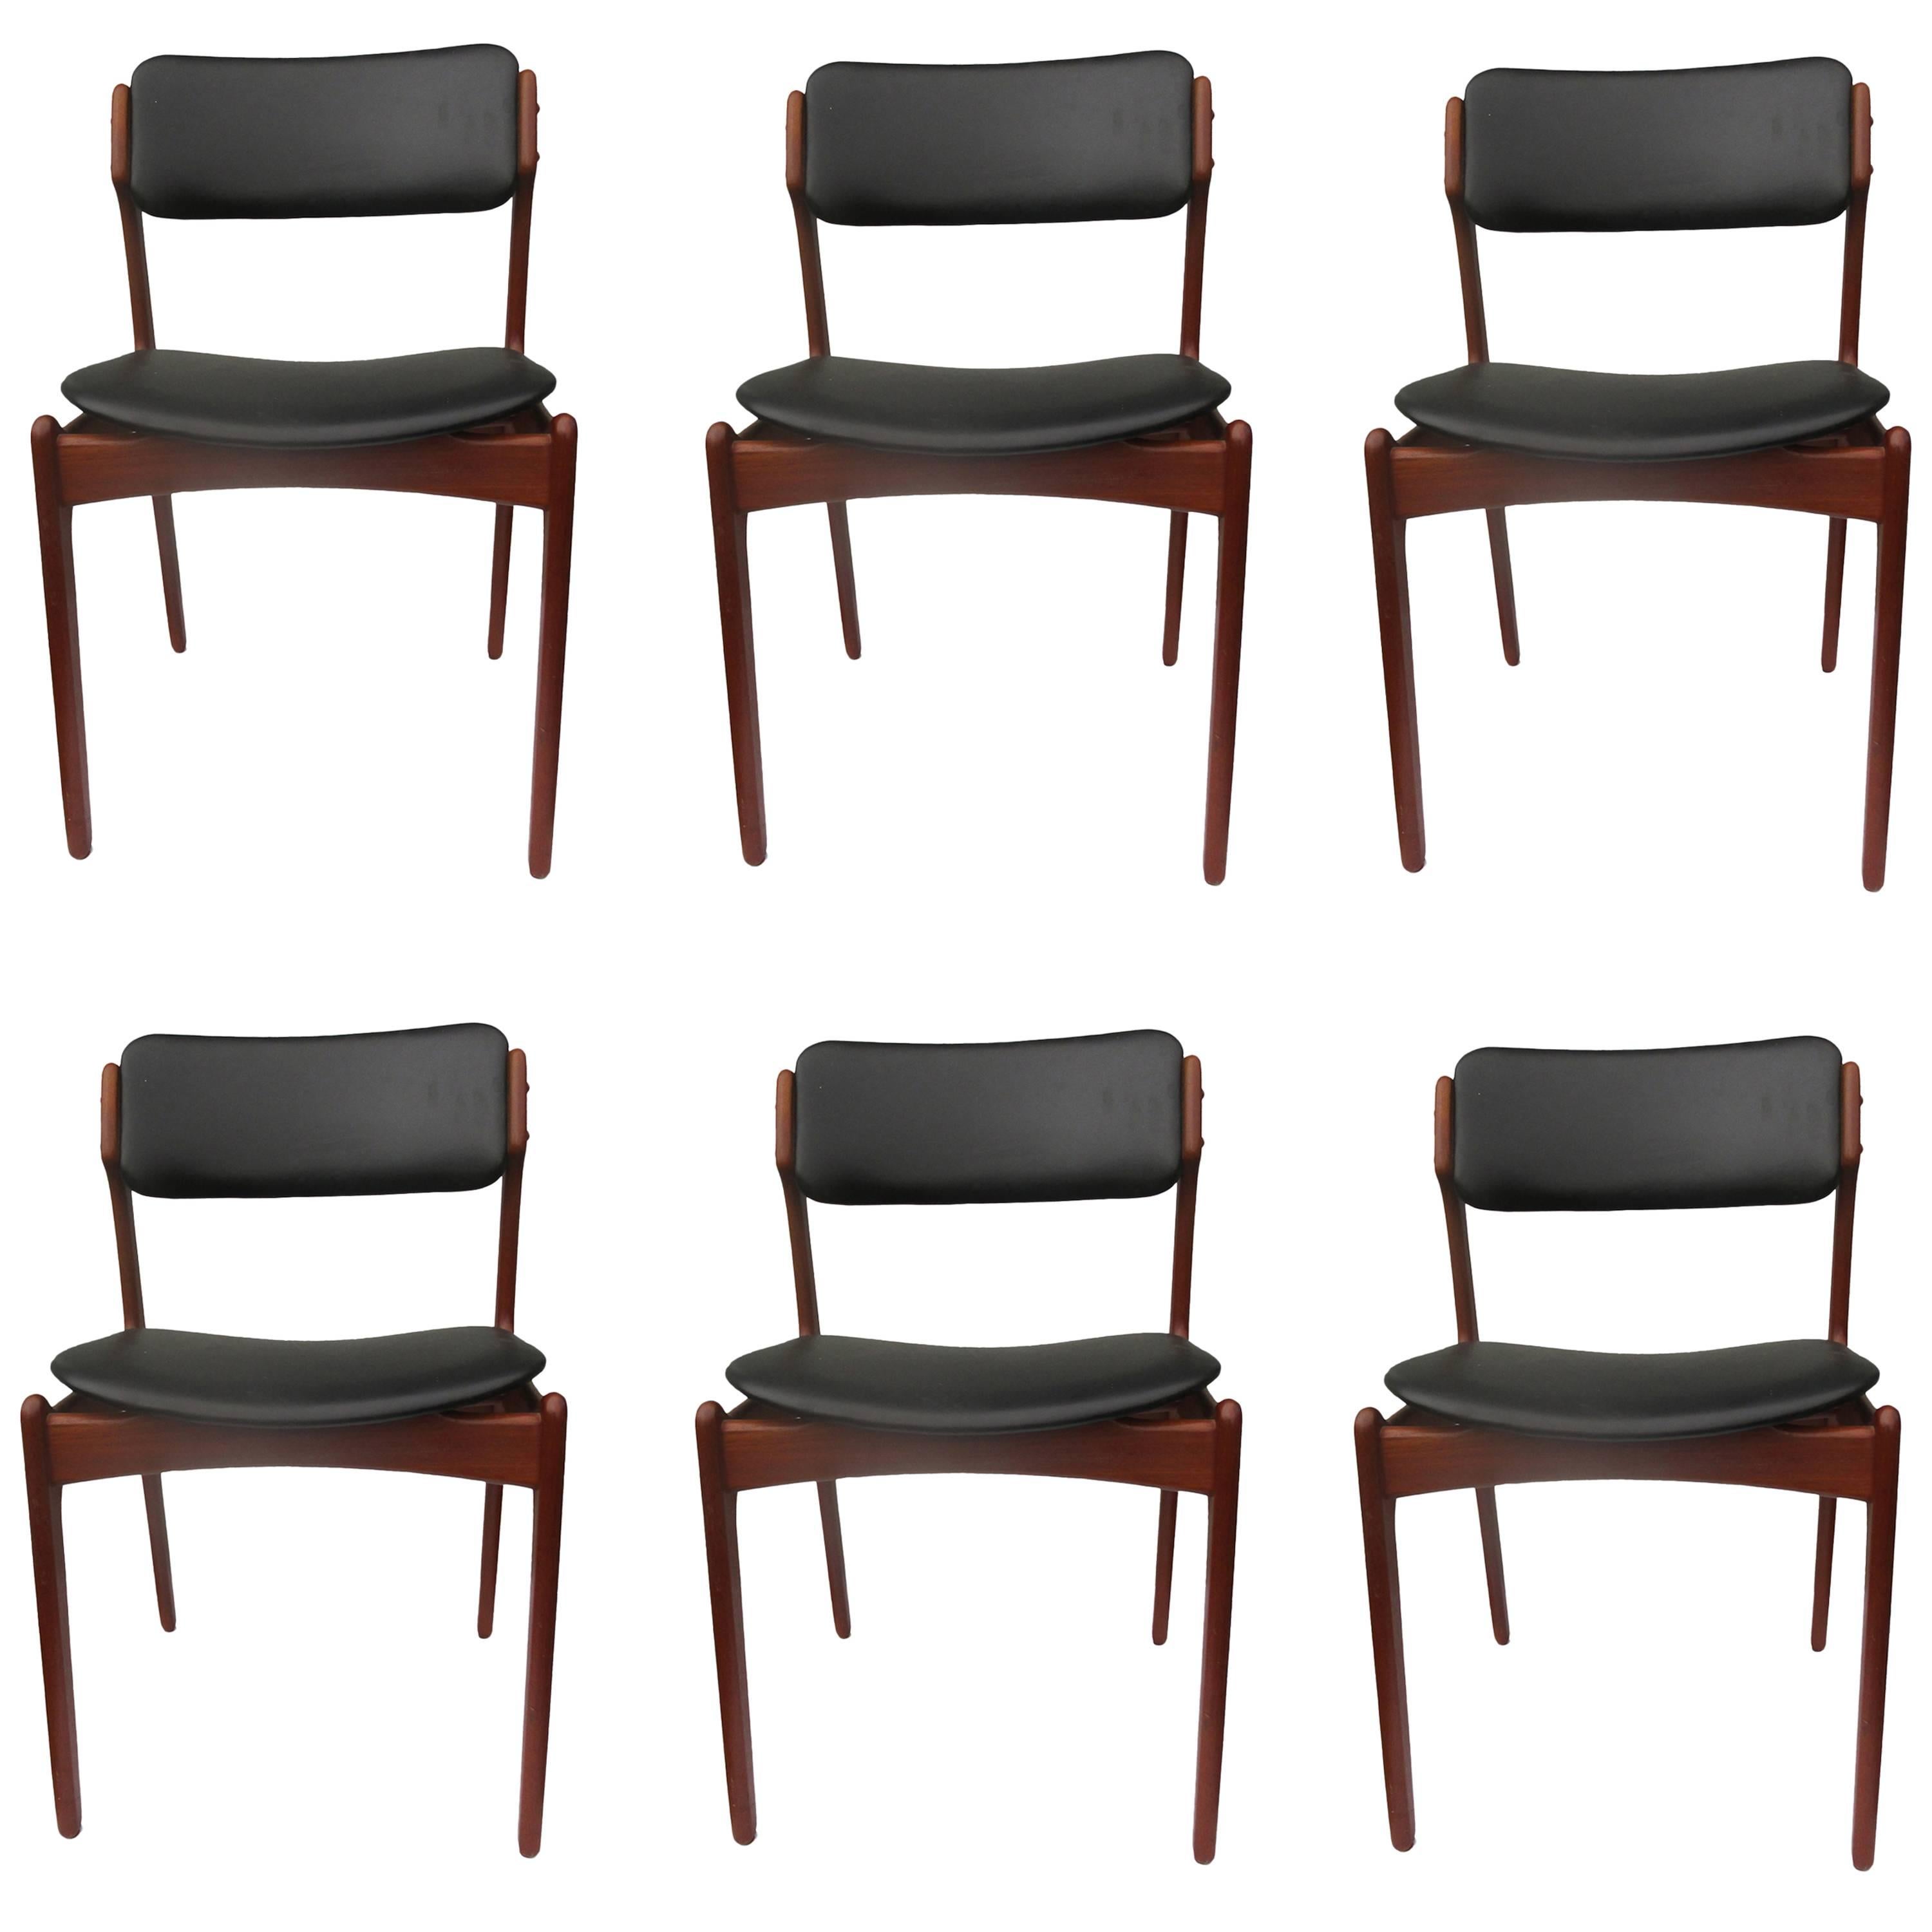 1960s Erik Buch Set of Six Teak Dining Chairs - Choice of Upholstery